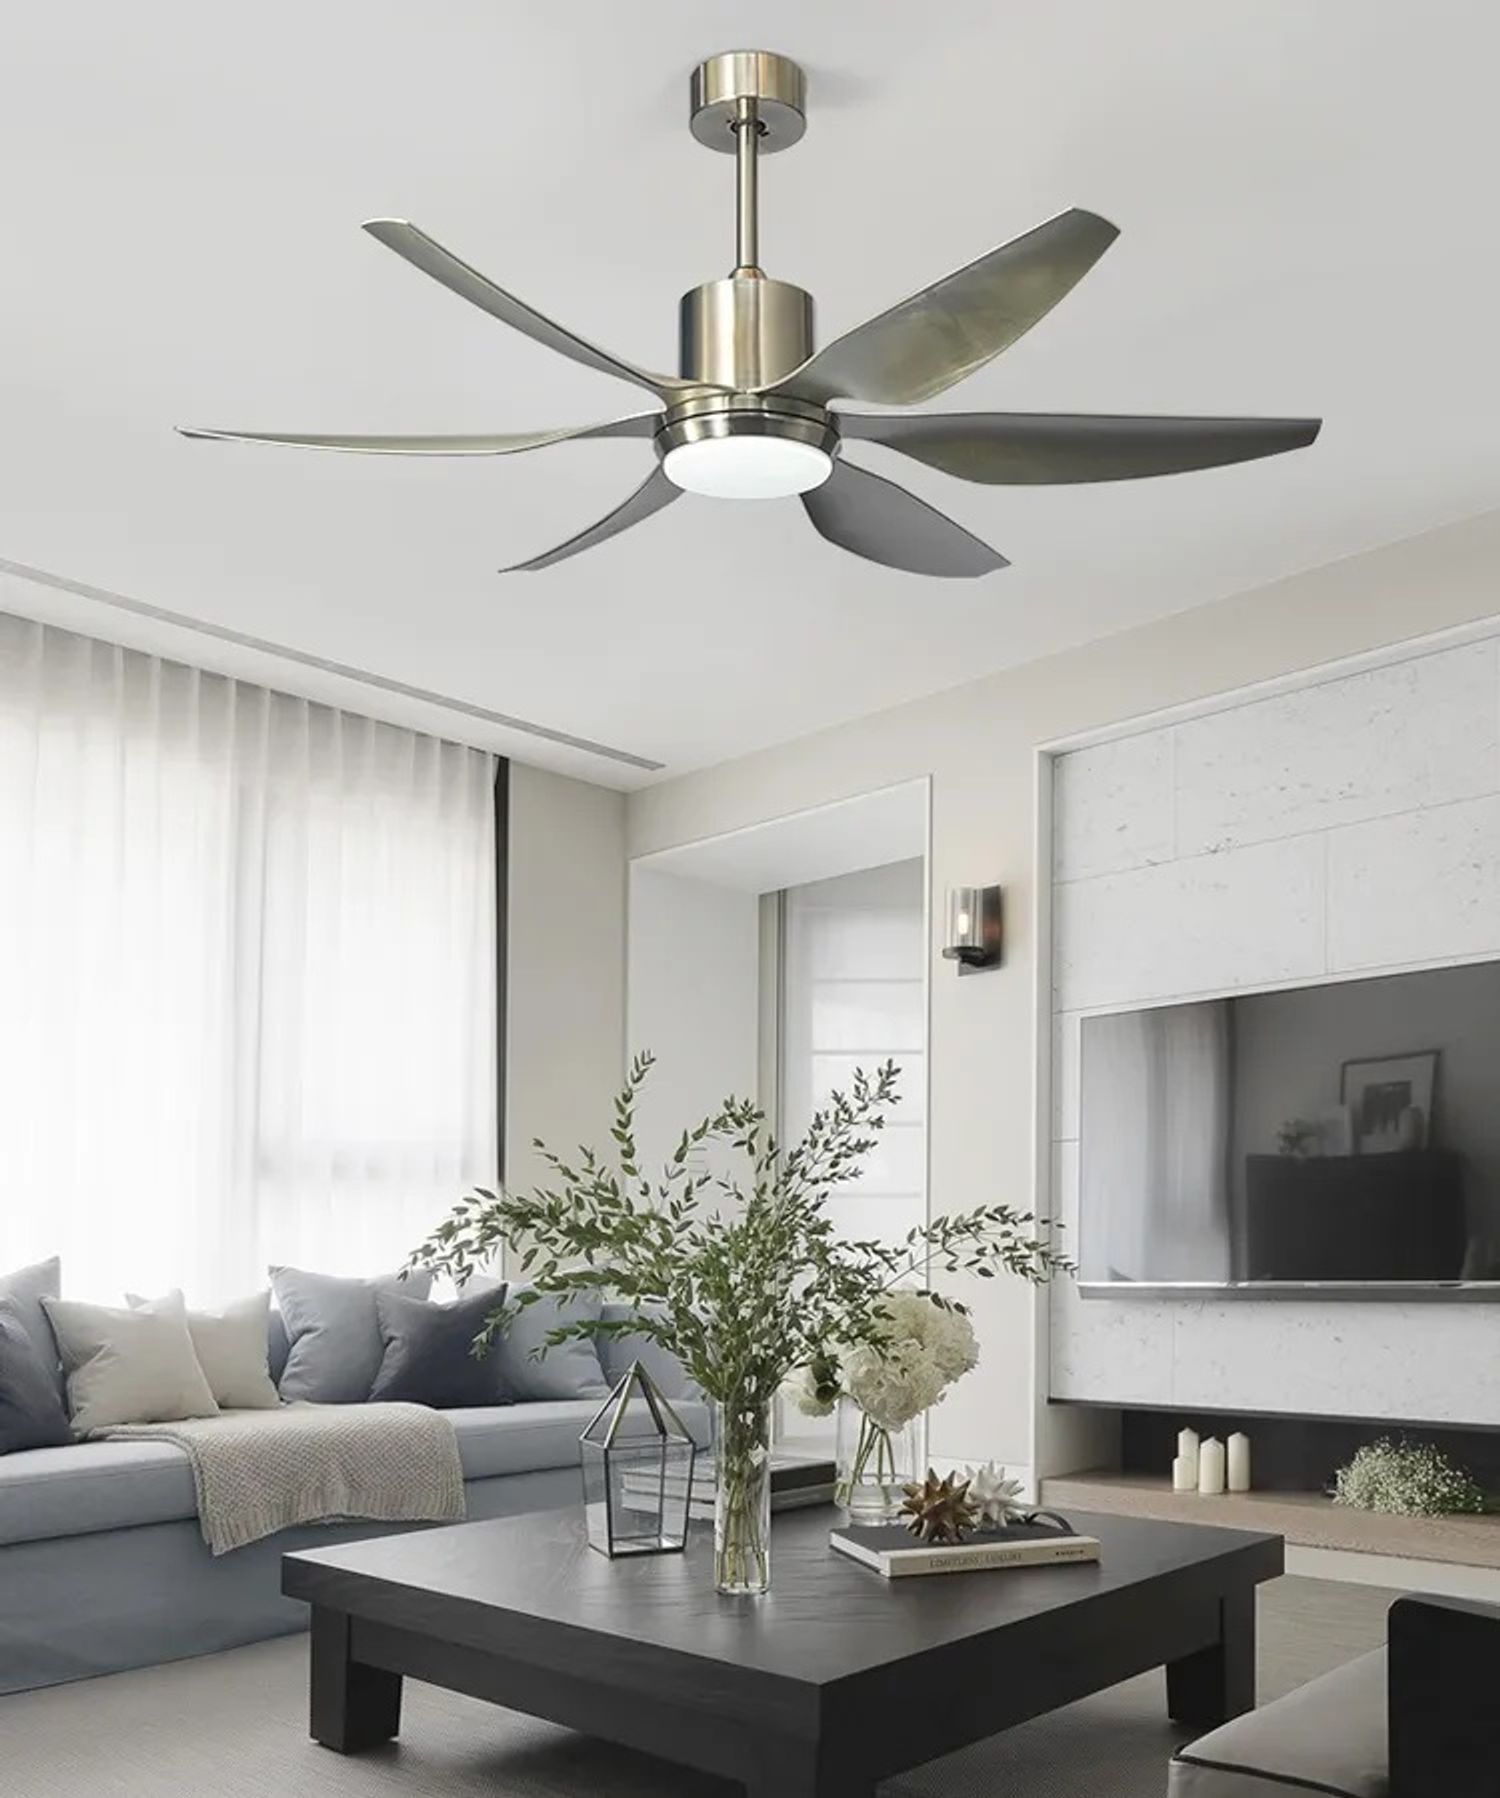 56 inch Silver modern dc ceiling fans with 6 blades and light in a living room